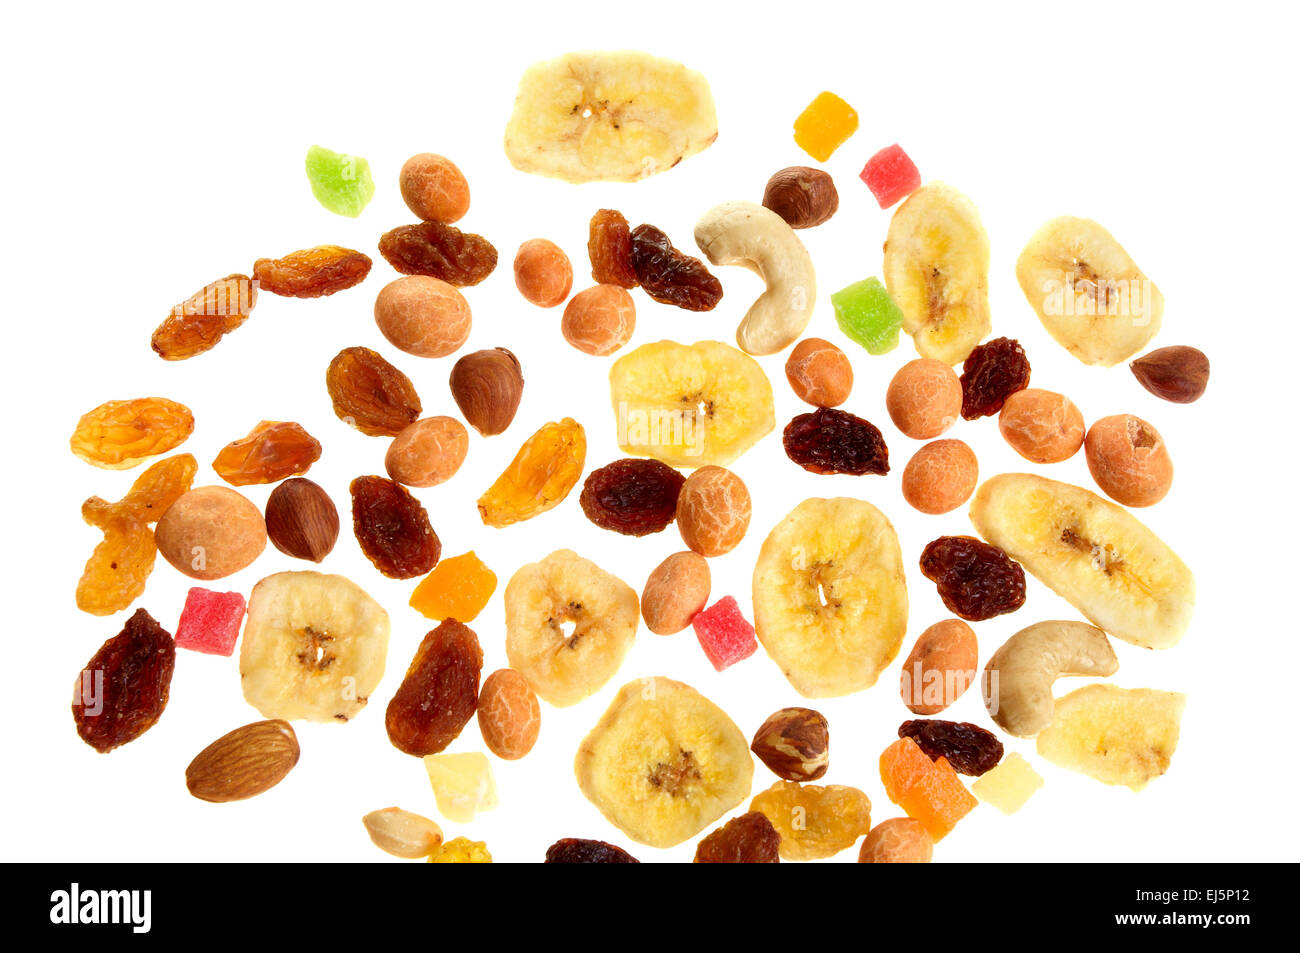 Mixed nuts, dried and candied fruits isolated on white Stock Photo